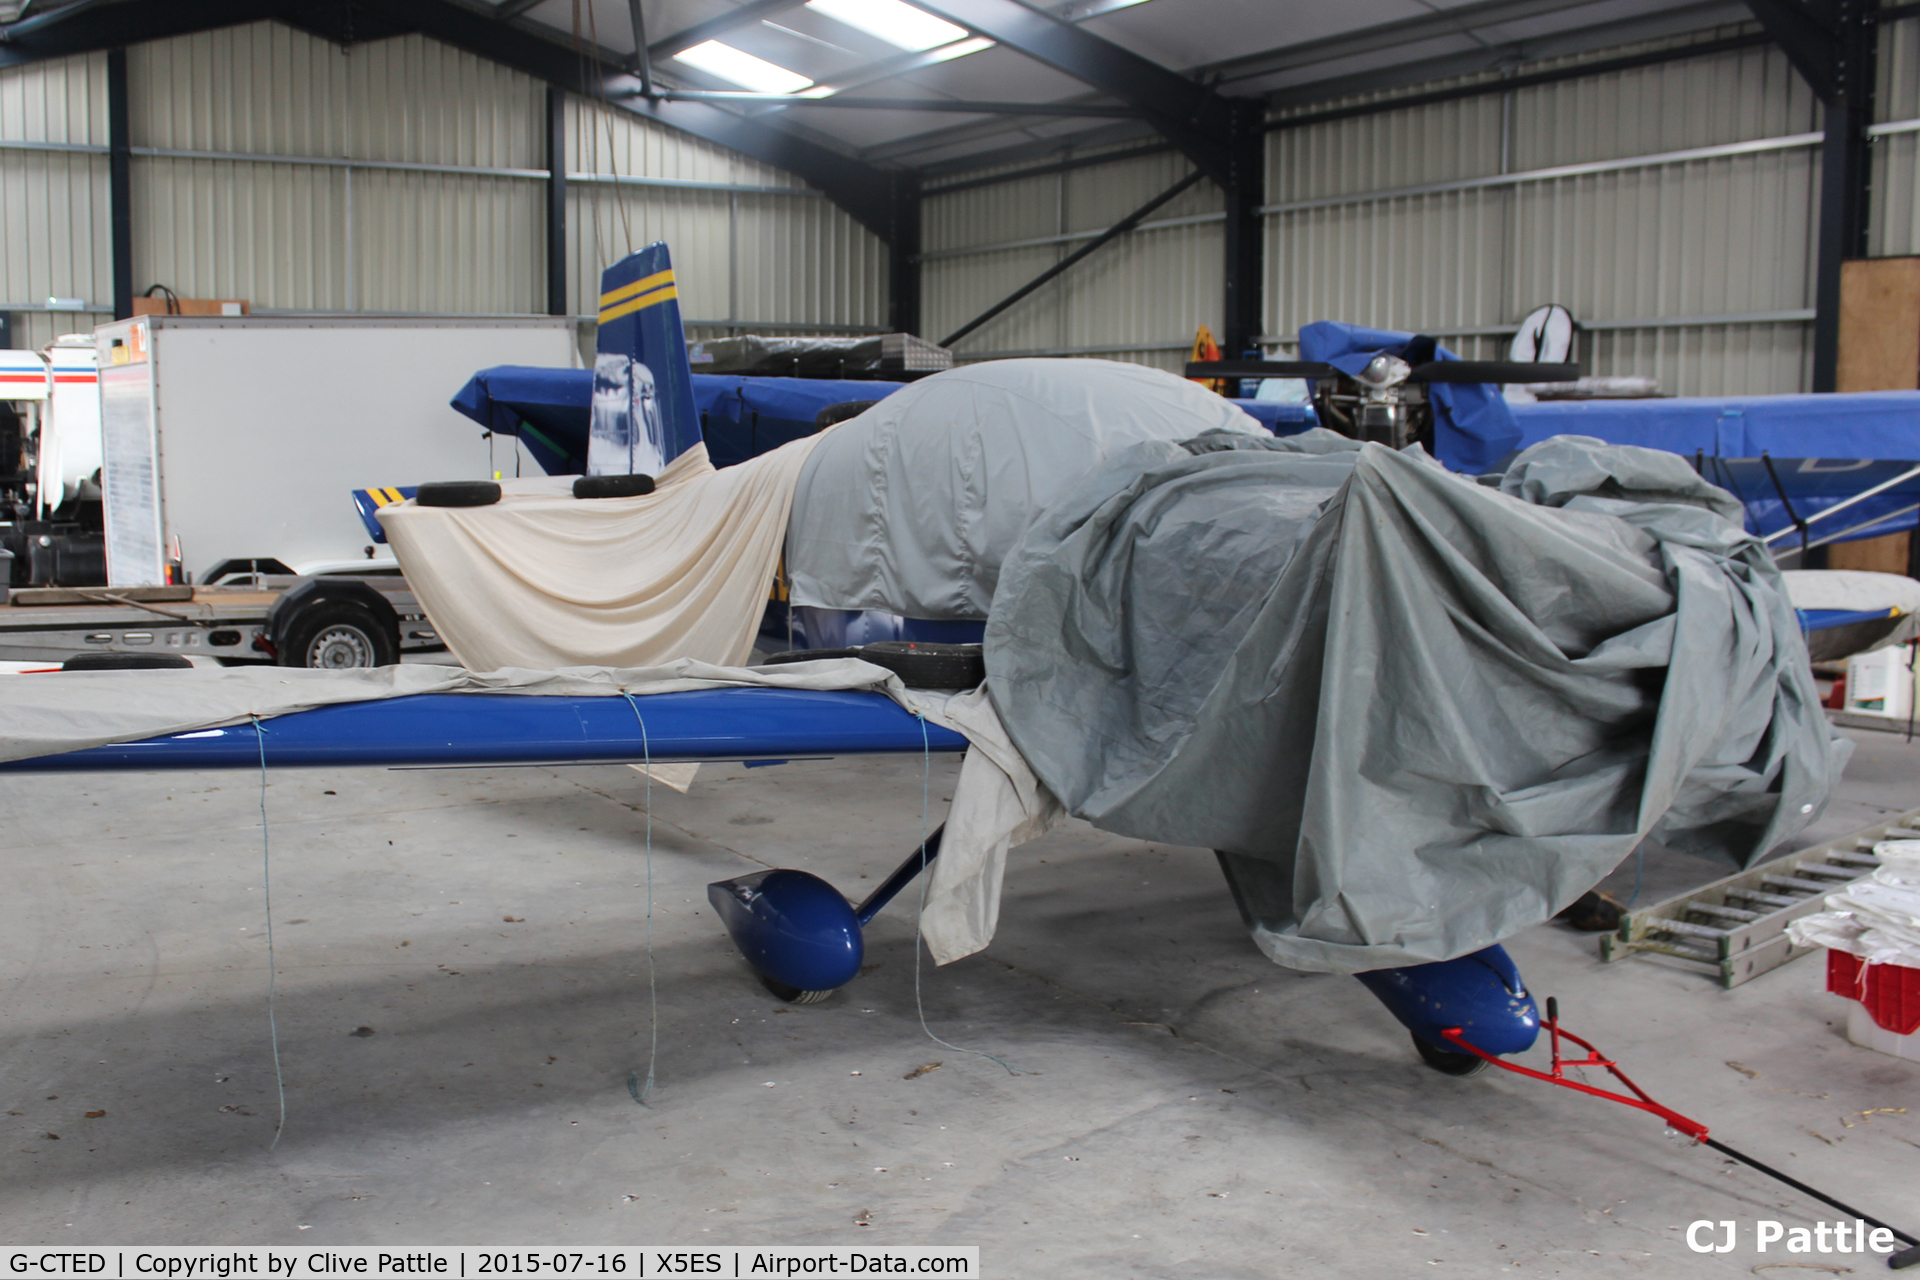 G-CTED, 2007 Vans RV-7A C/N PFA 323-14631, Hangared and well under wraps at Eshott Airfield, Northumberland, UK.